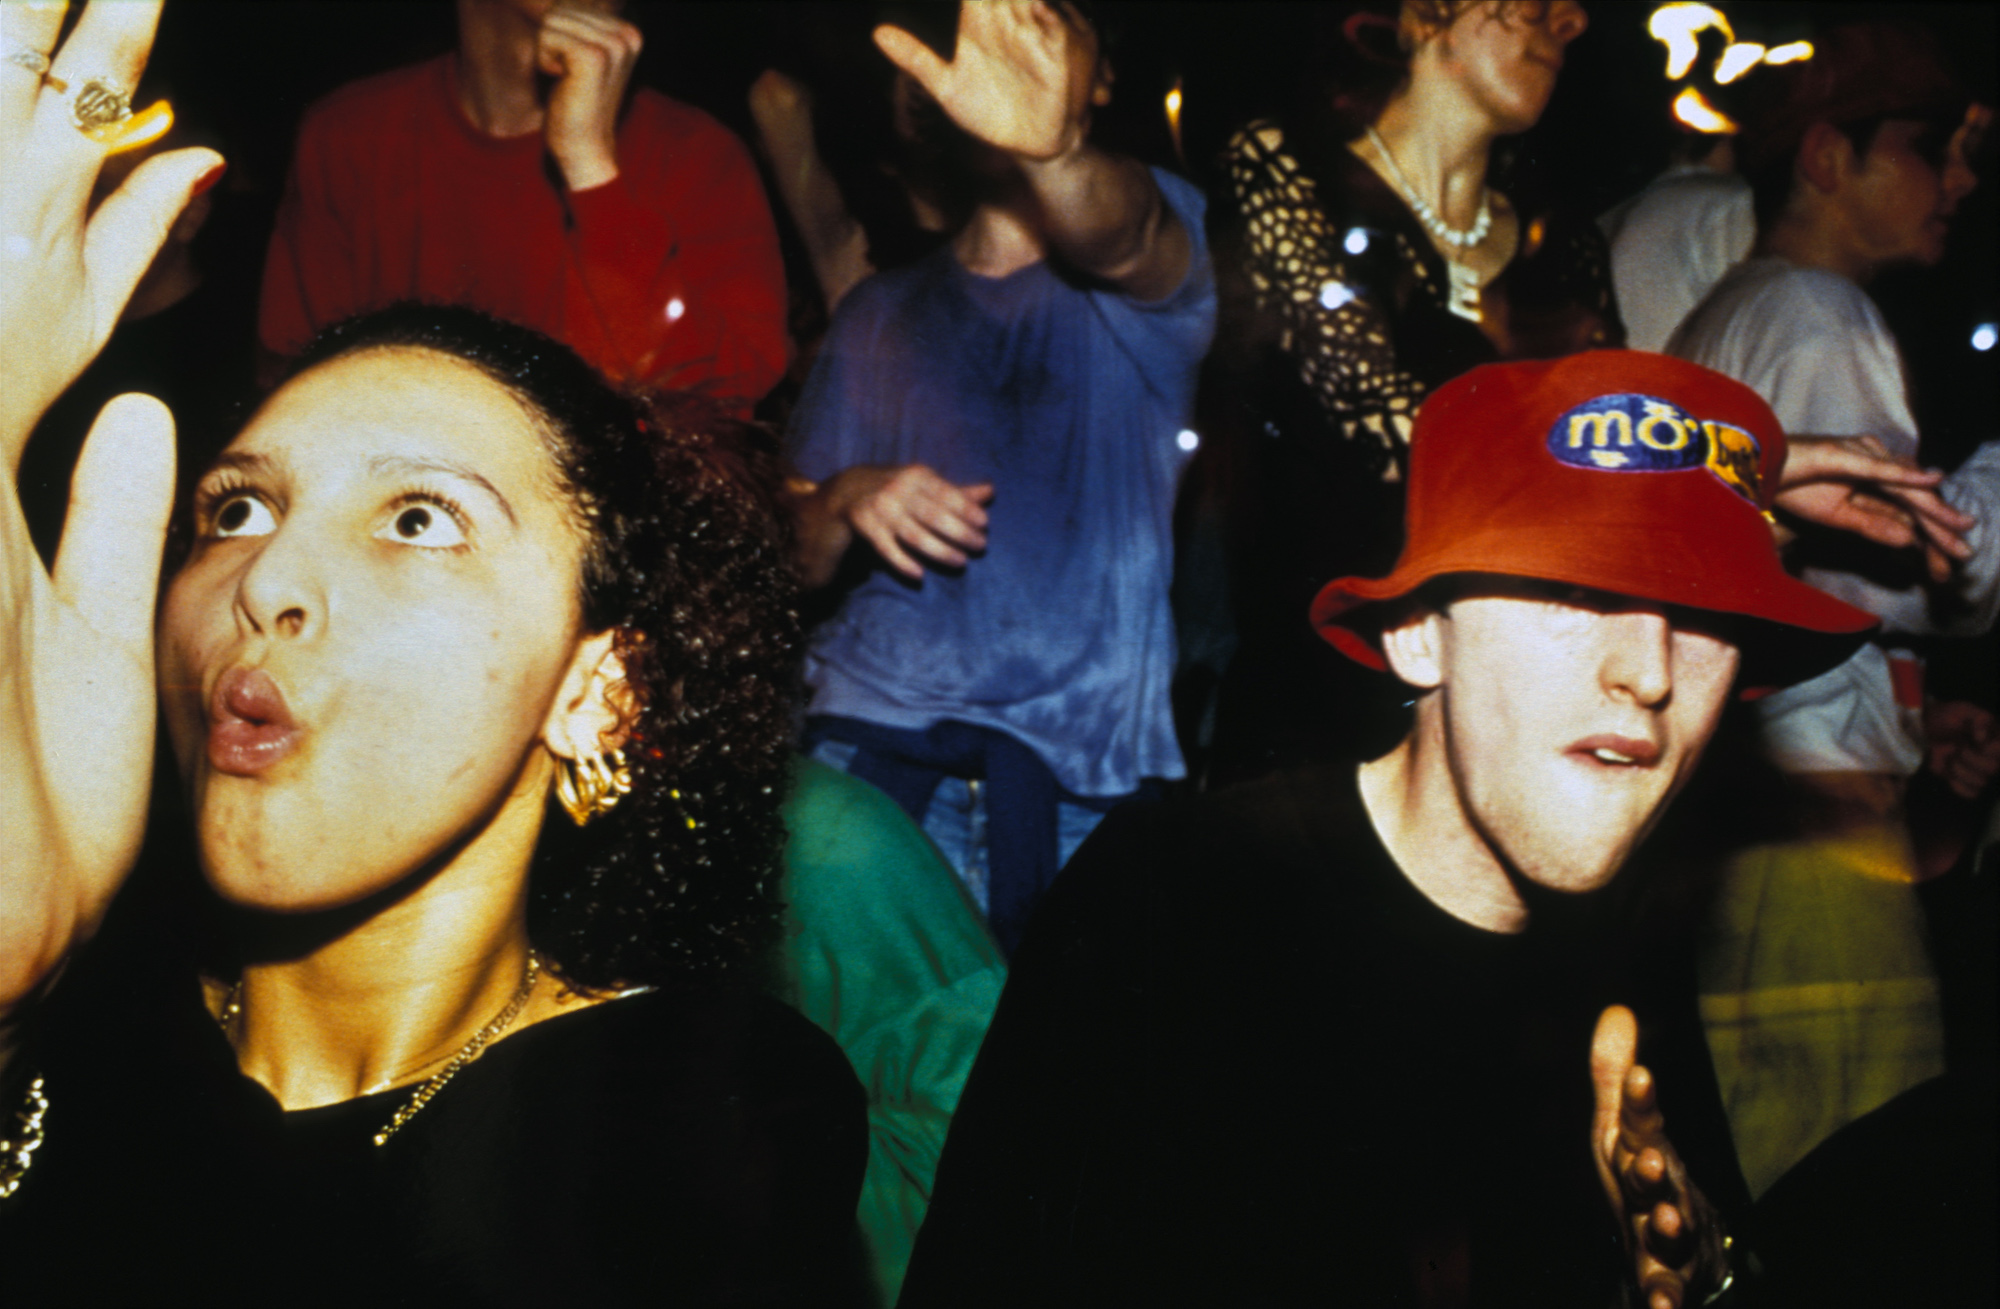 A New History of Rave Music